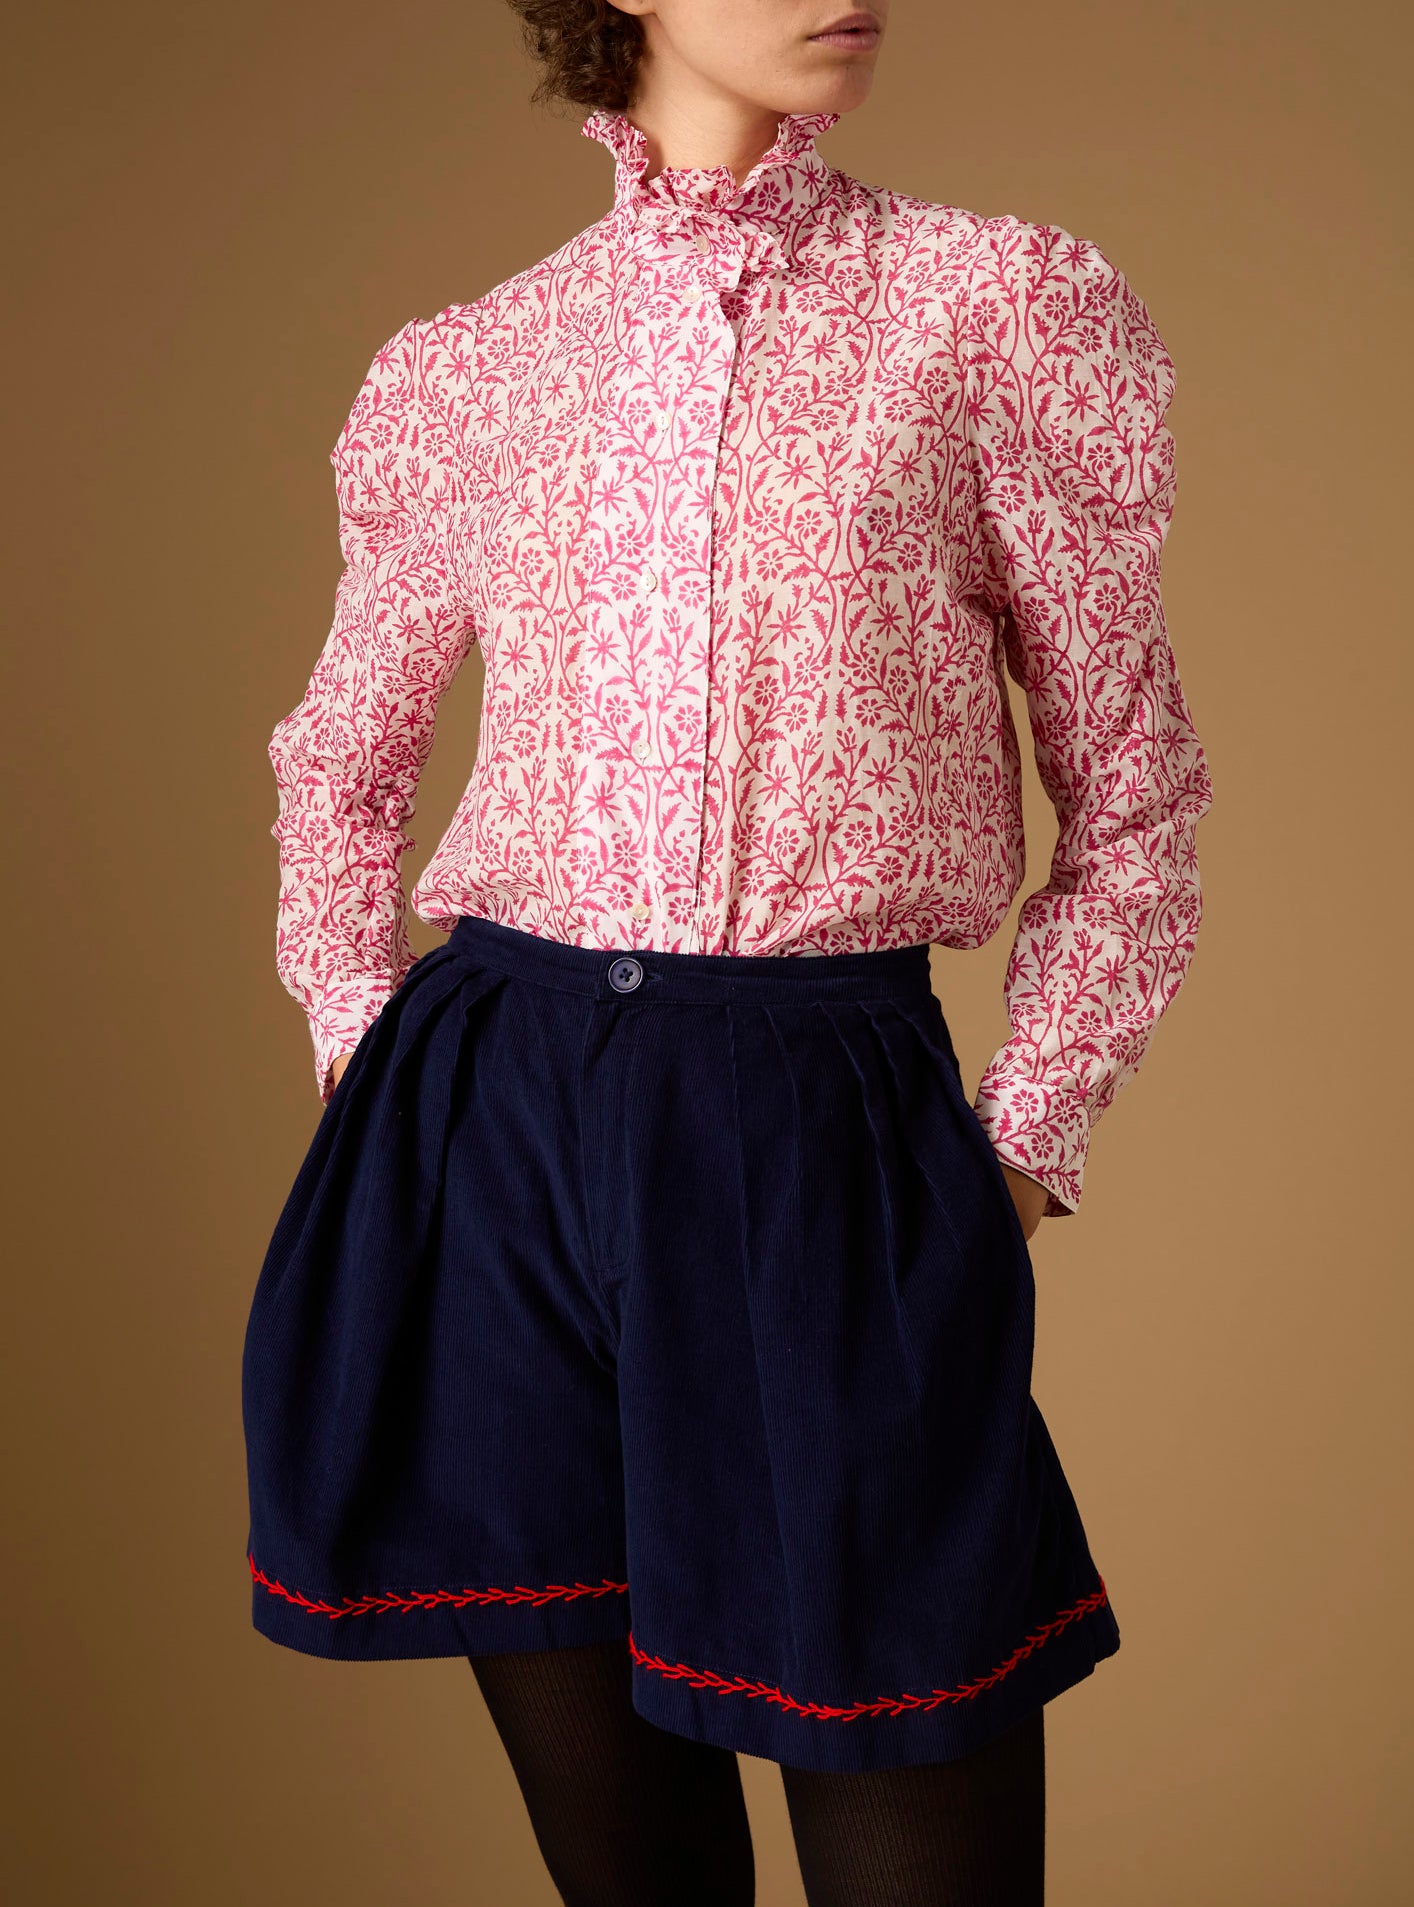 Large view of Wind Bright Rose Blouse with Kenya shorts - Paper Cut Print by Thierry Colson